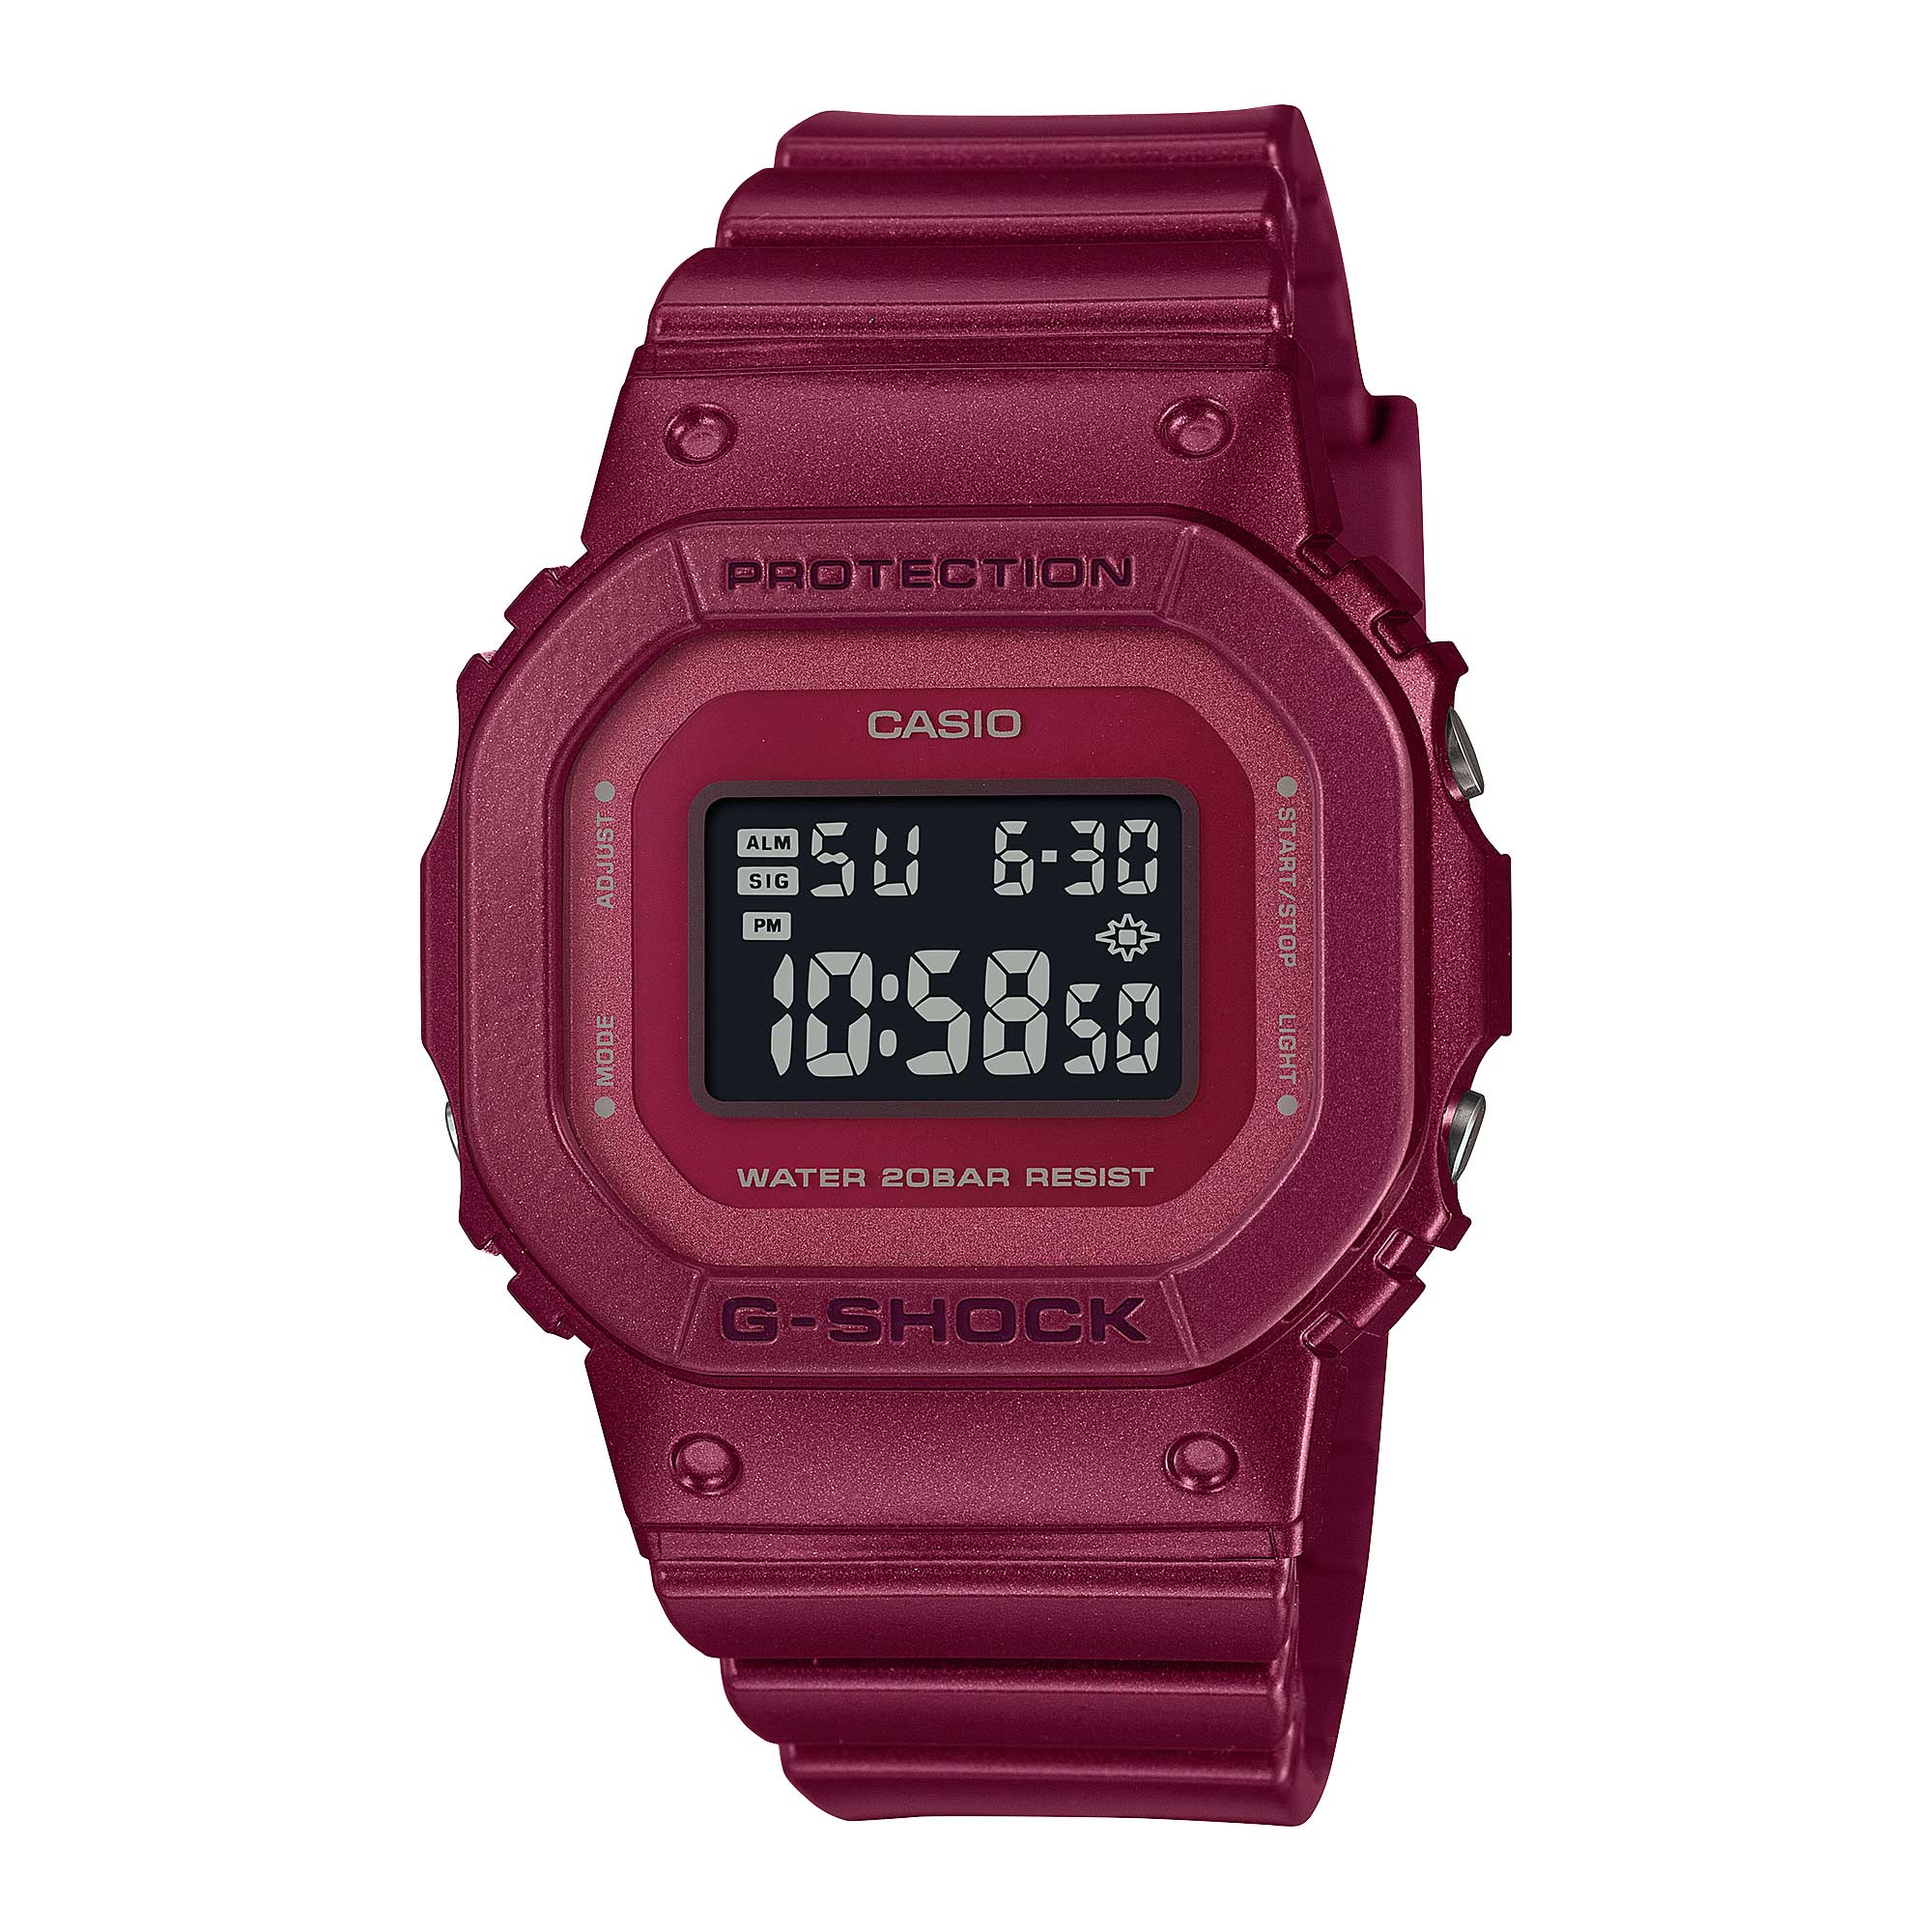 Casio G-Shock for Ladies' Black and Red Series Glossy Metallic Watch GMDS5600RB-4D GMD-S5600RB-4D GMD-S5600RB-4